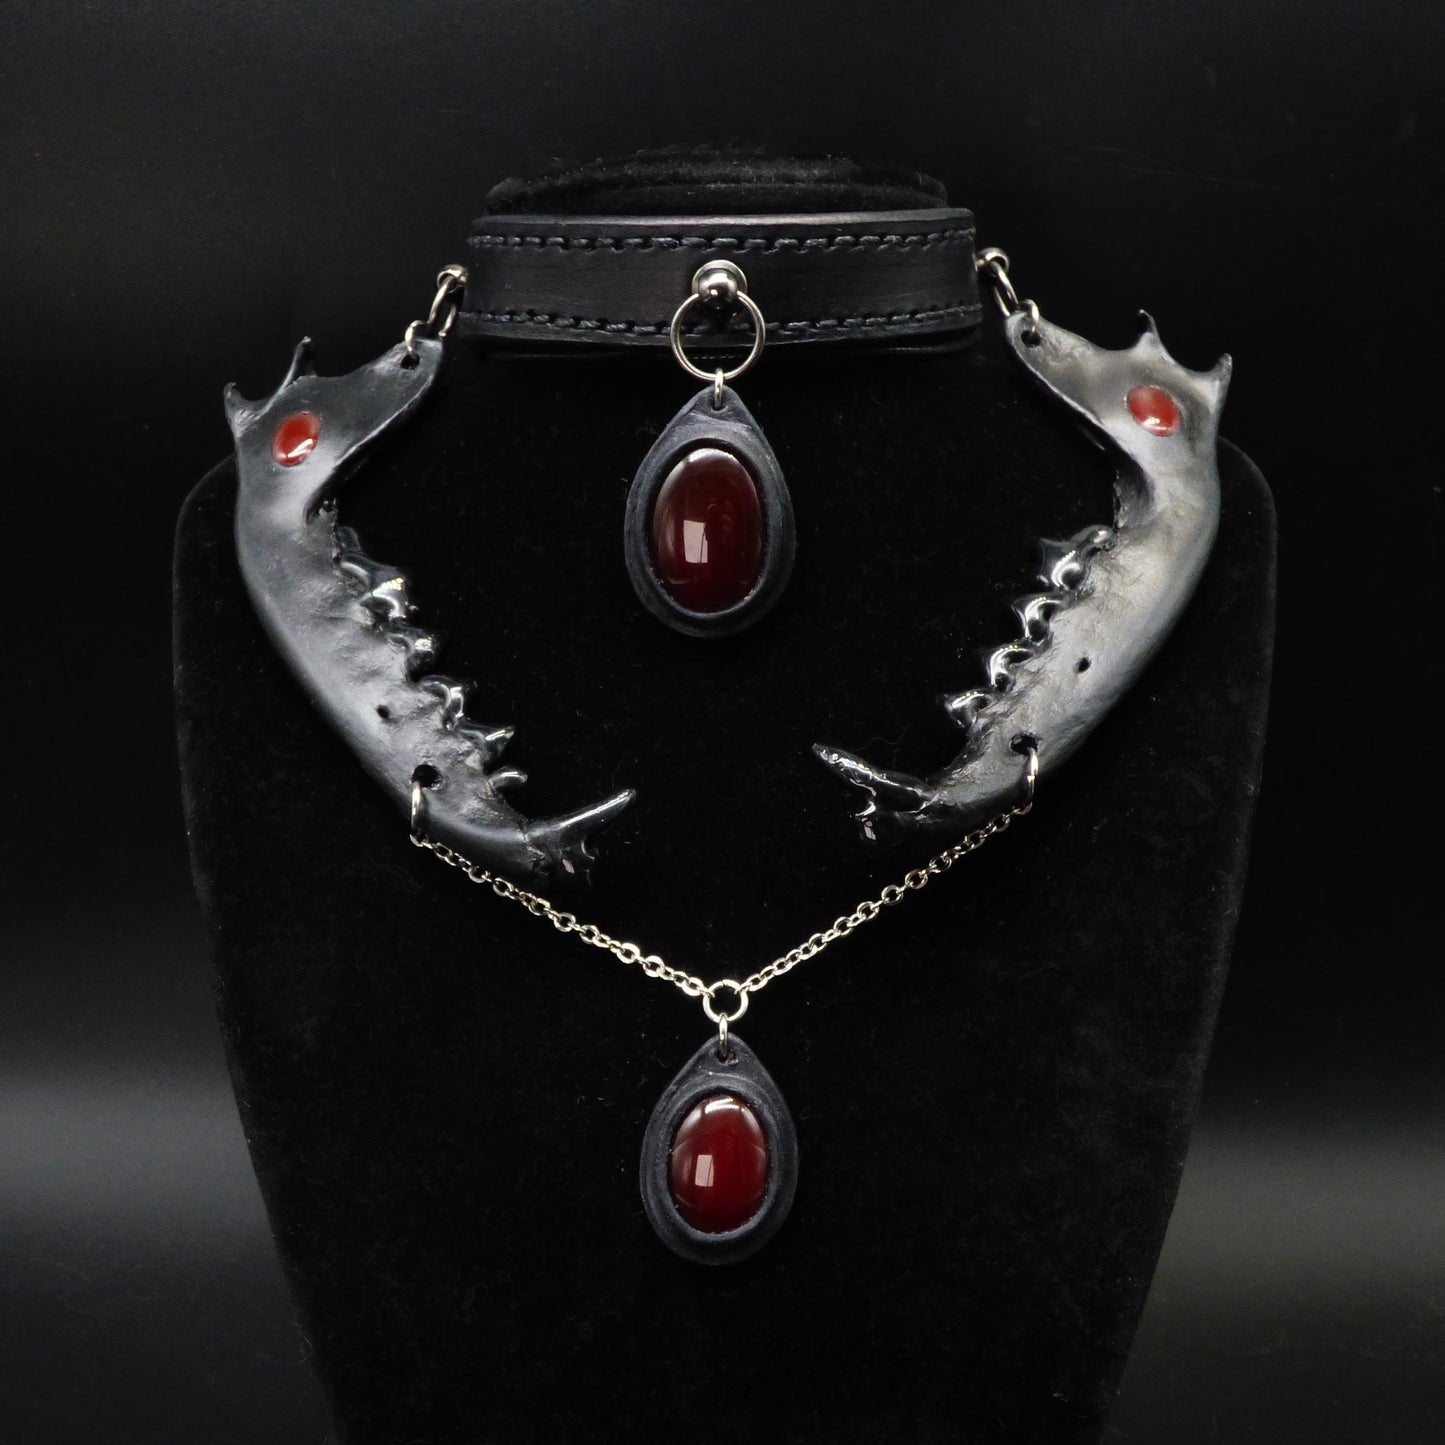 Leather Choker with Fox Mandibles and Carnelian Stone